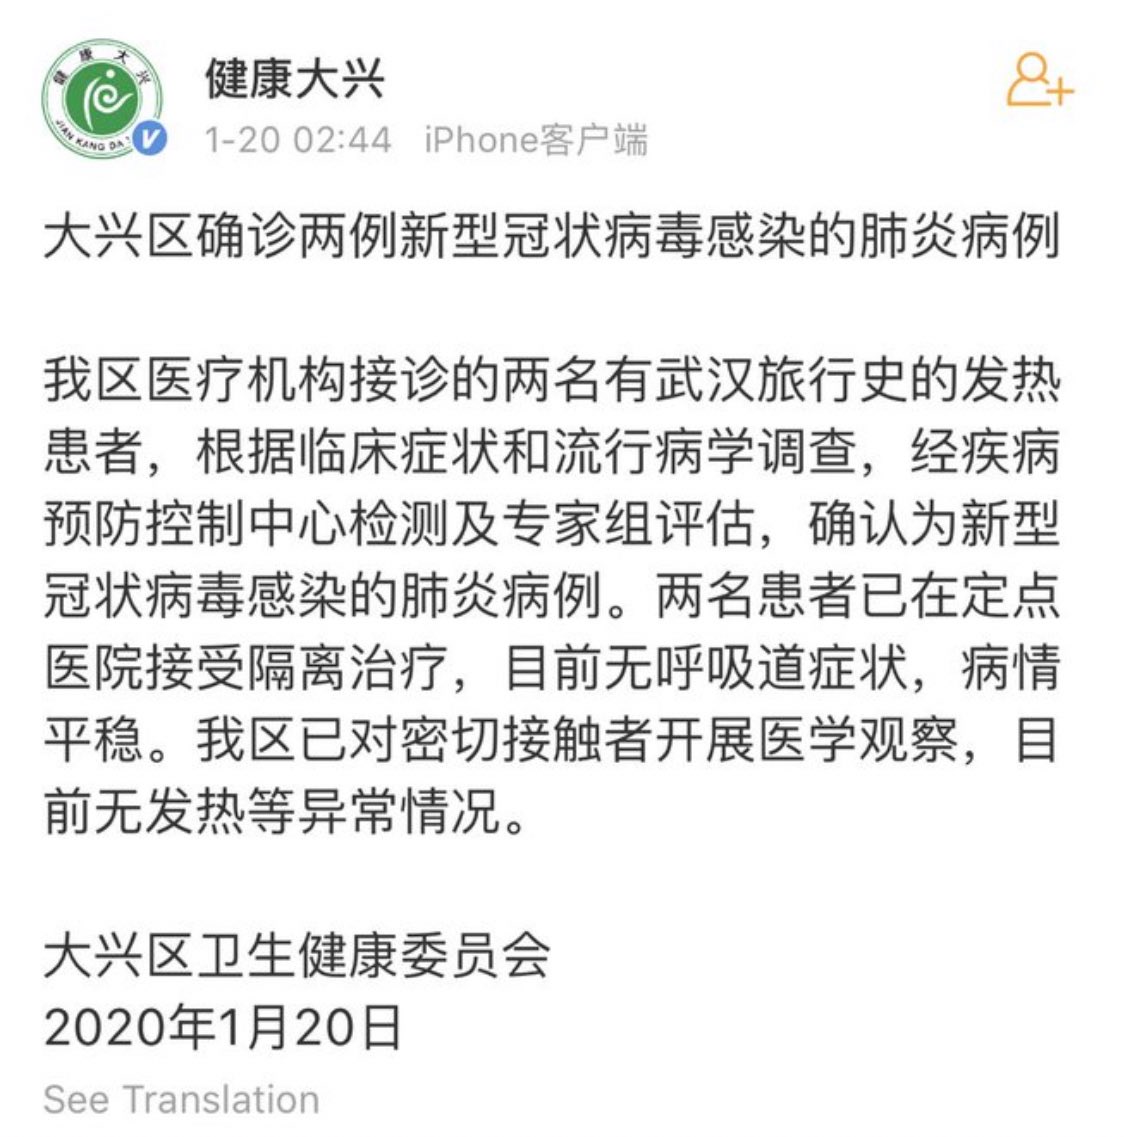 January 20, 2:44 a.m.: The Beijing Daxing district health department sends an alert about two travelers who have been infected after a visit to Wuhan. They were isolated at a hospital in stable condition, with no shortness of breath. Cases in Beijing at the time: less than 10.